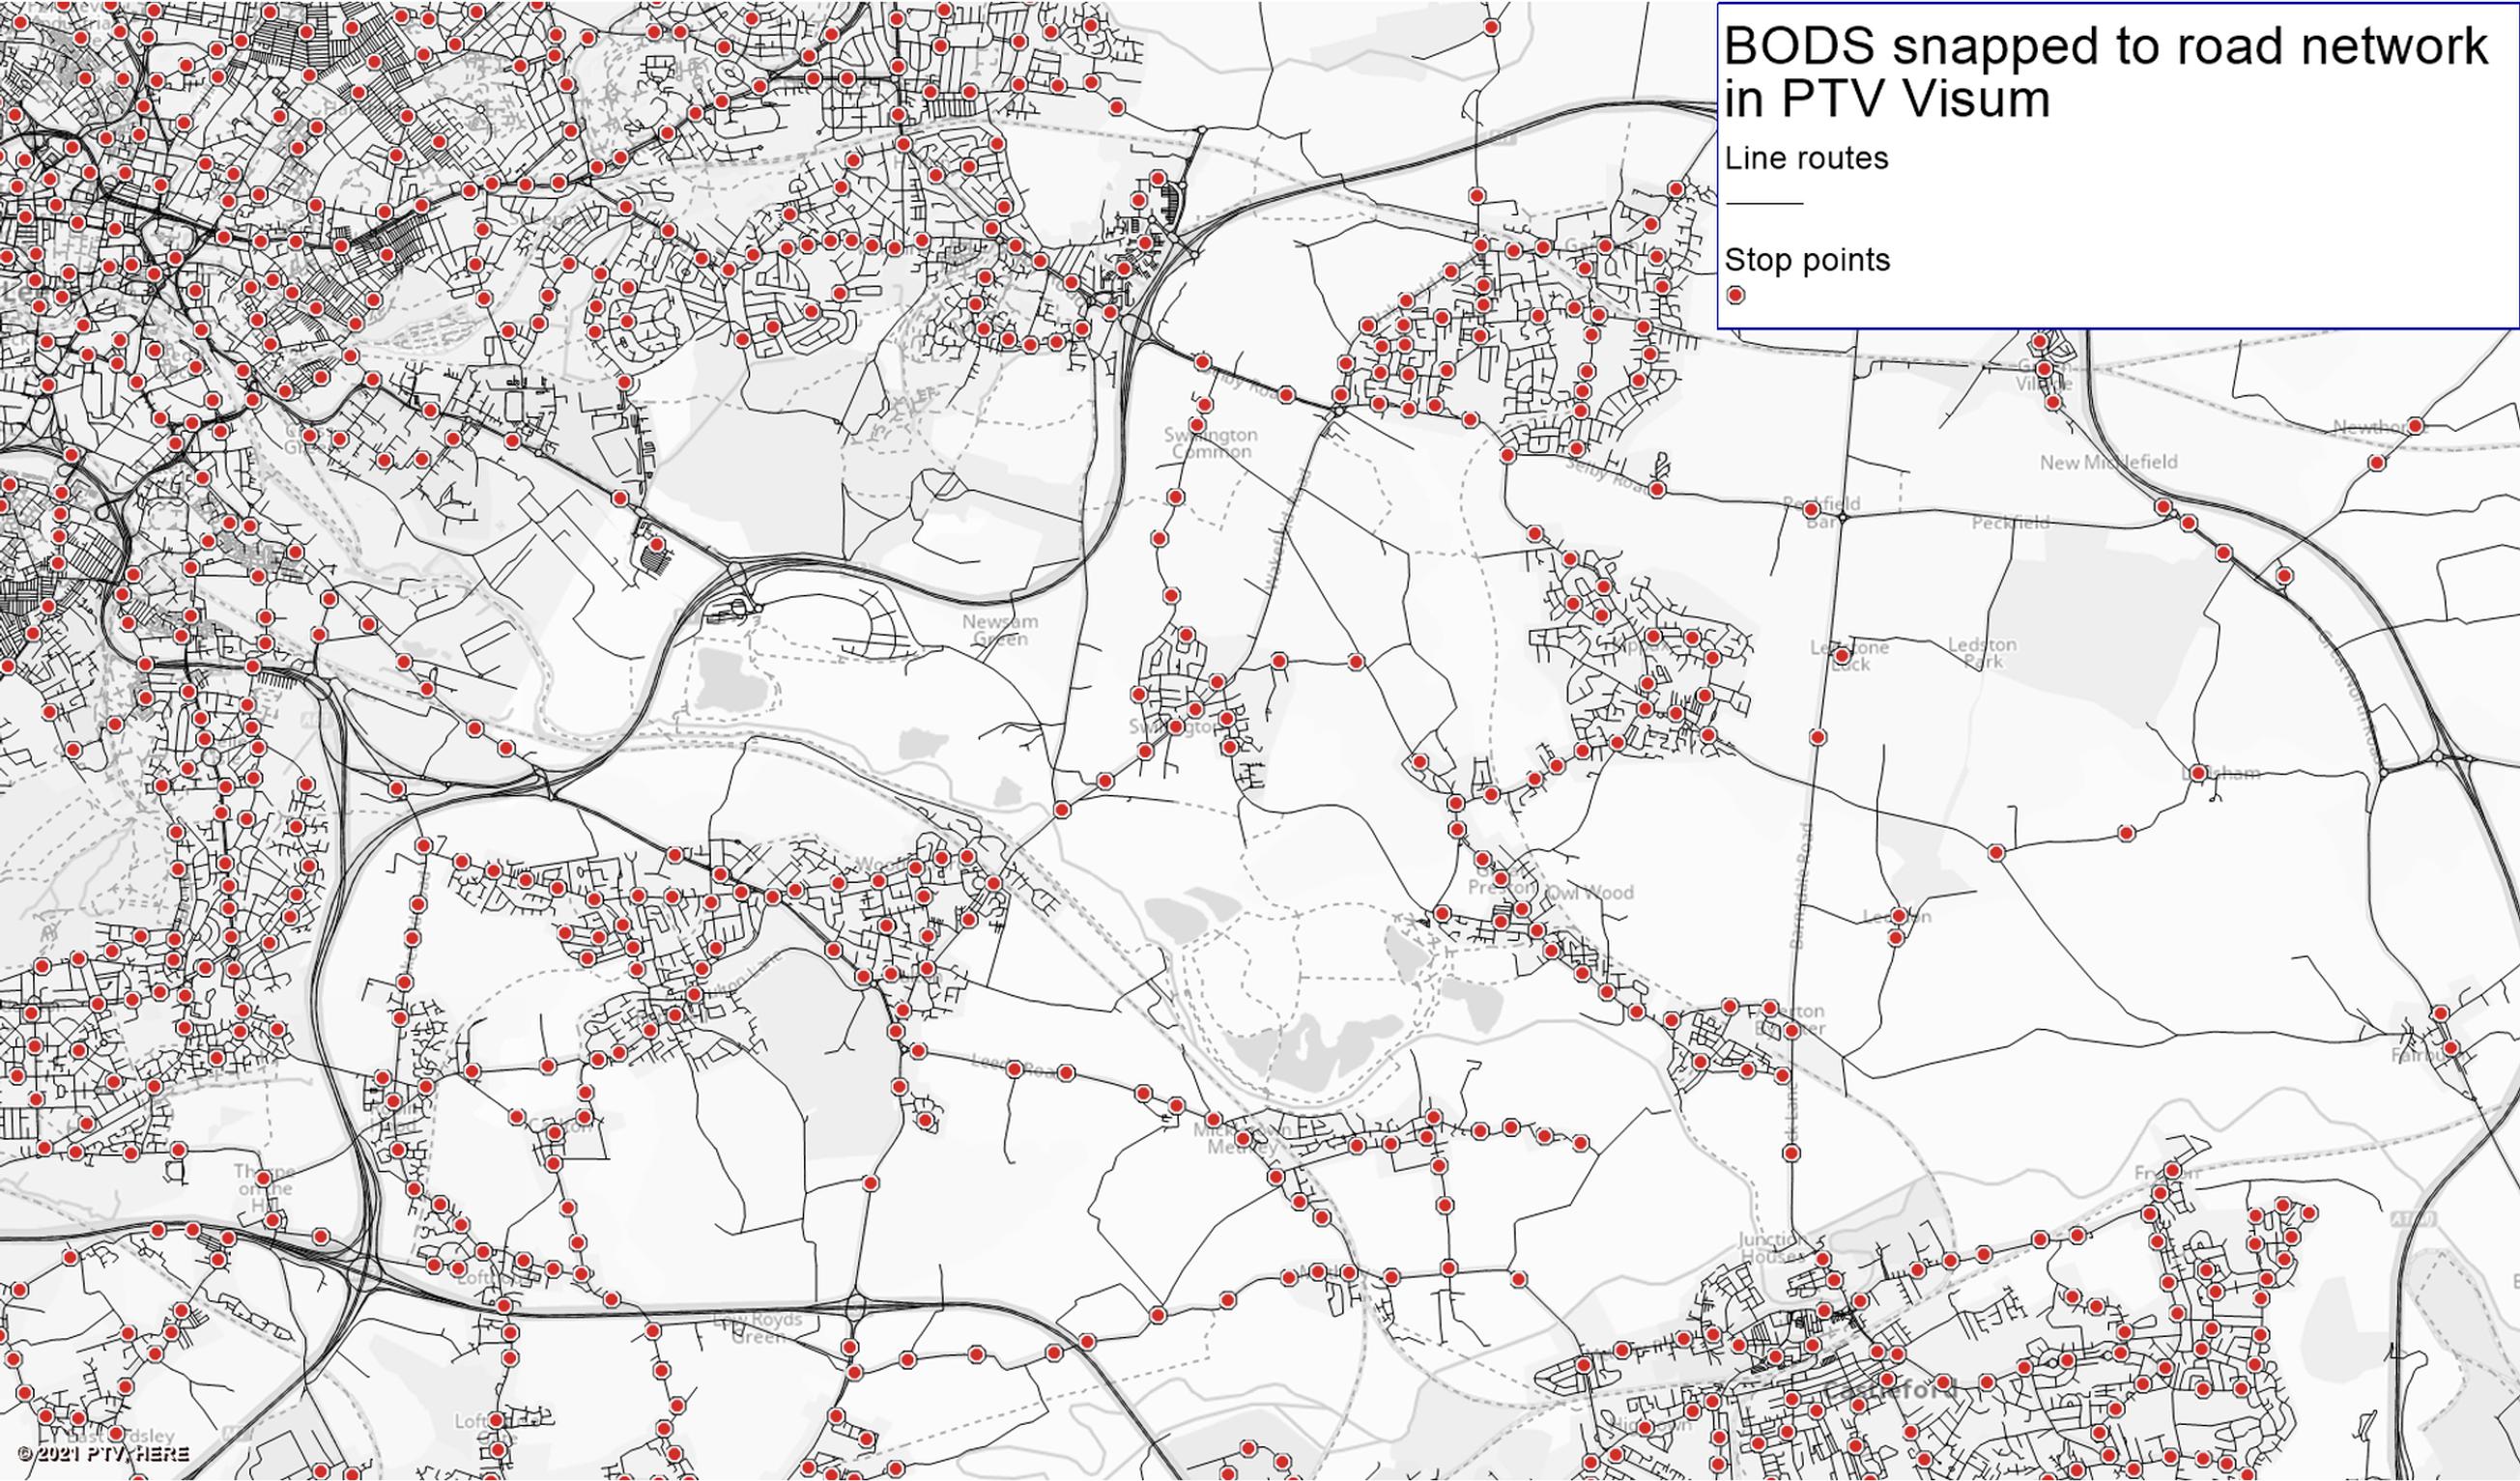 We used OpenStreetMap (OSM) as a base layer, but any other network layer would also work